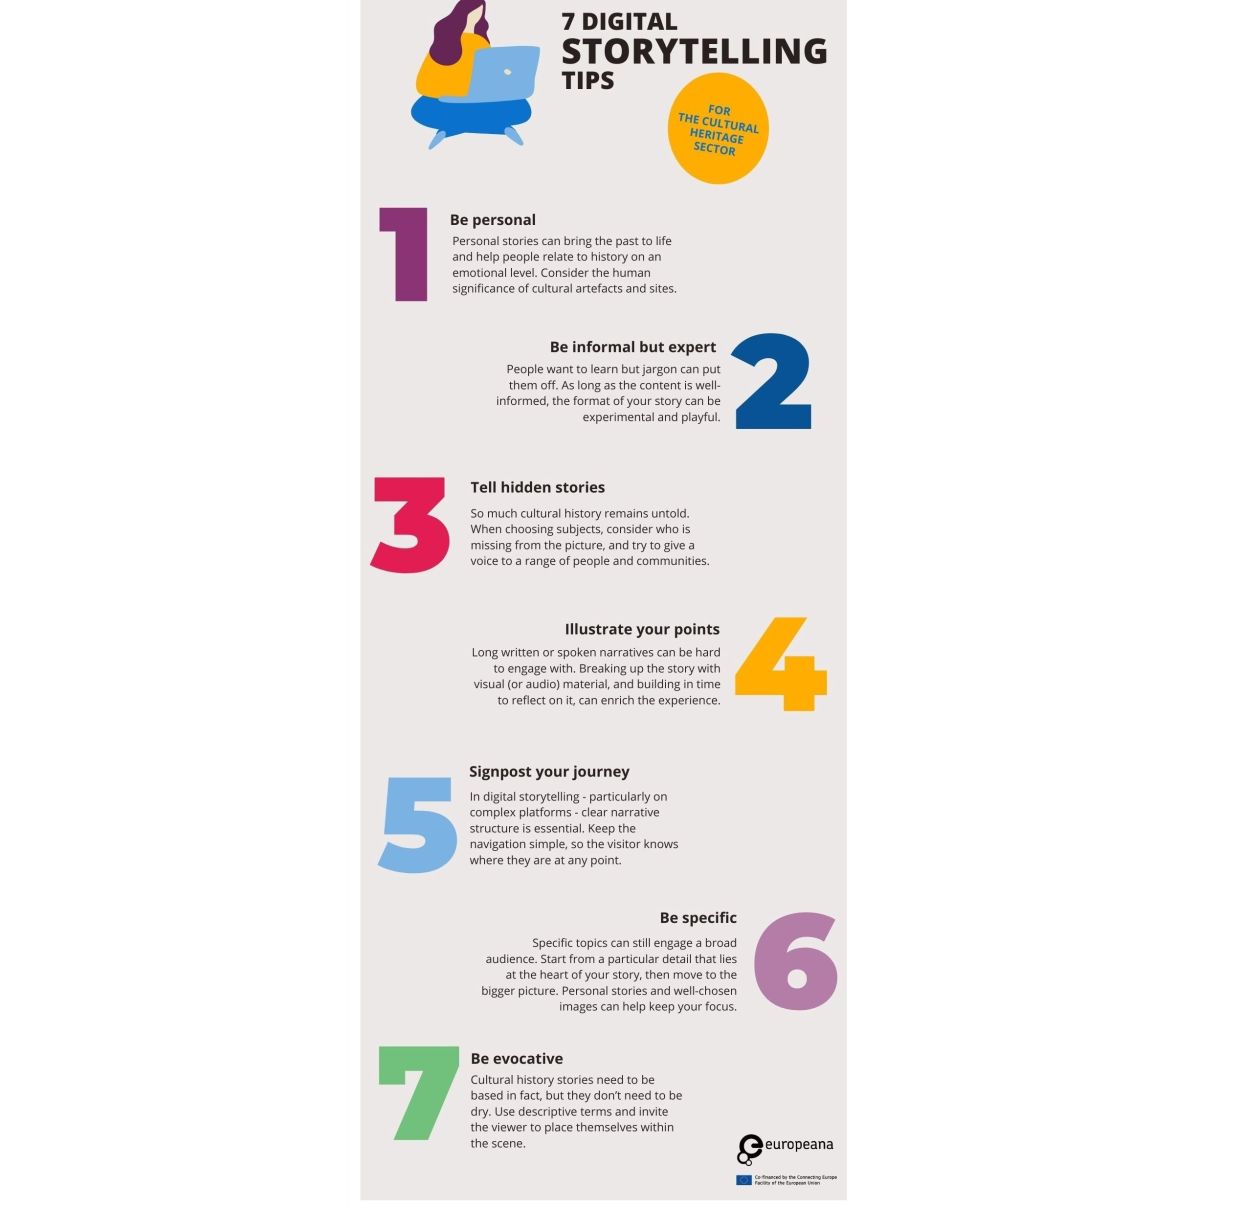 Seven tips for digital storytelling with cultural heritage (full text below)